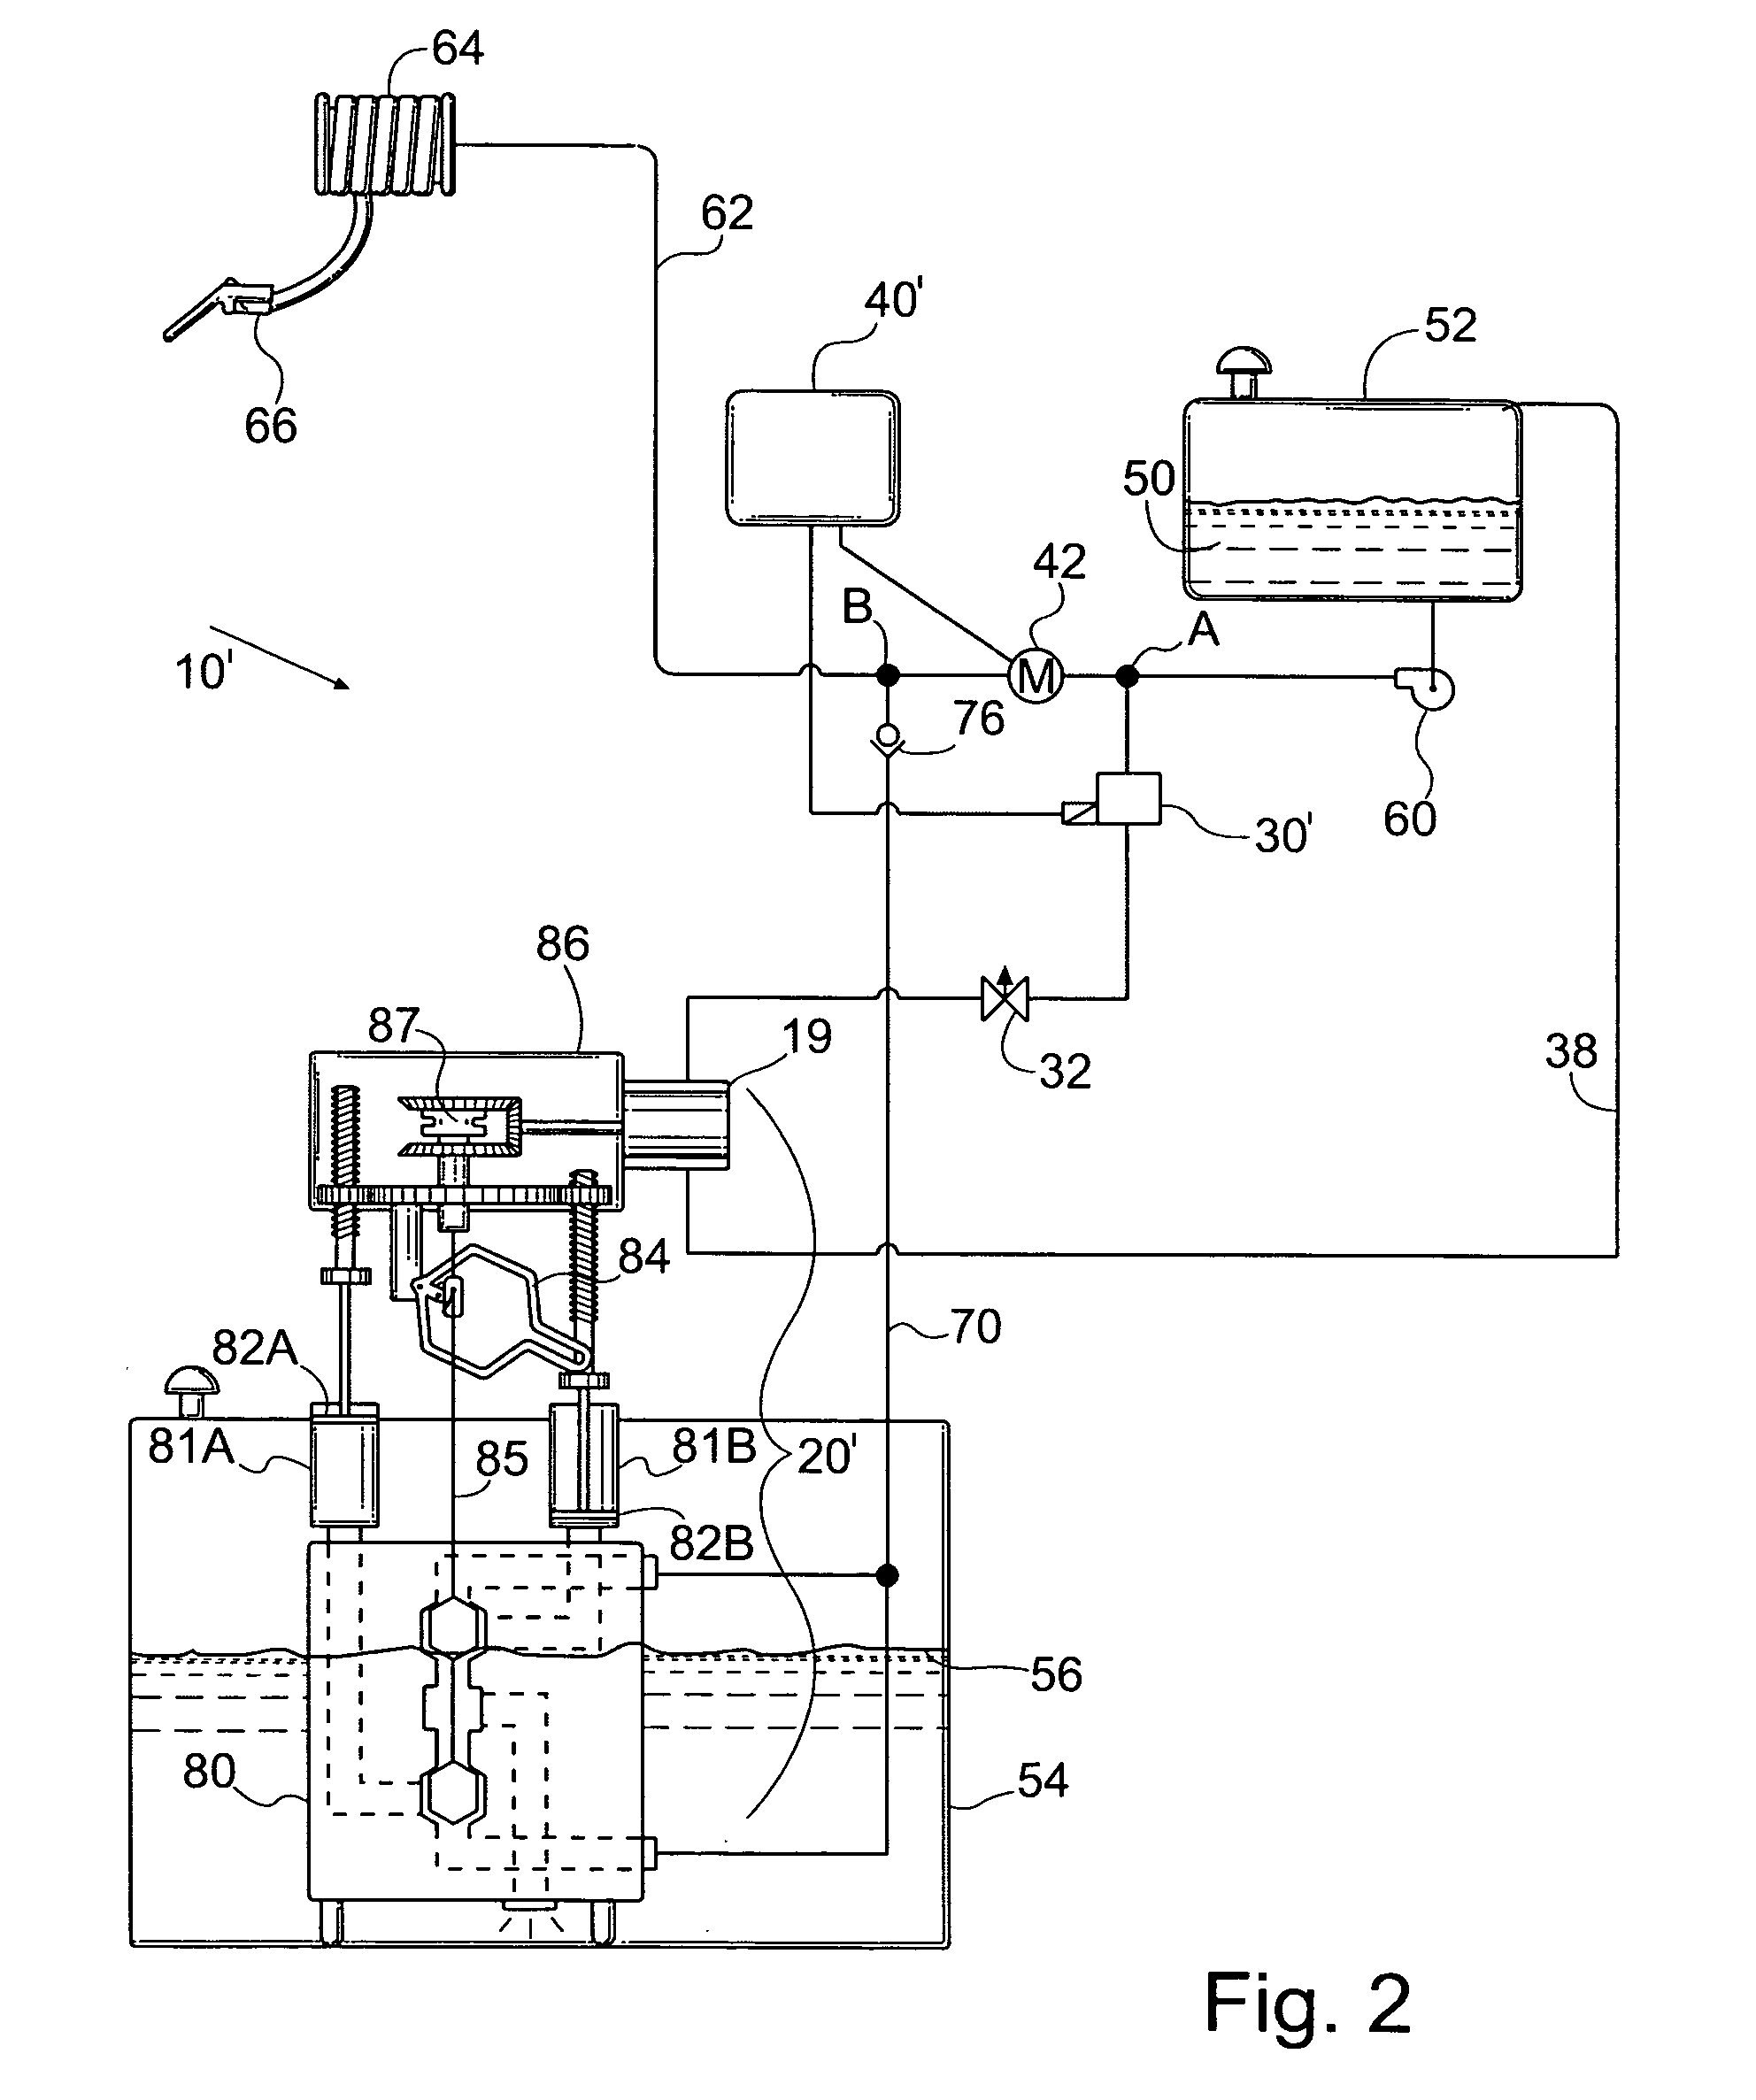 Fluid powered additive injection system